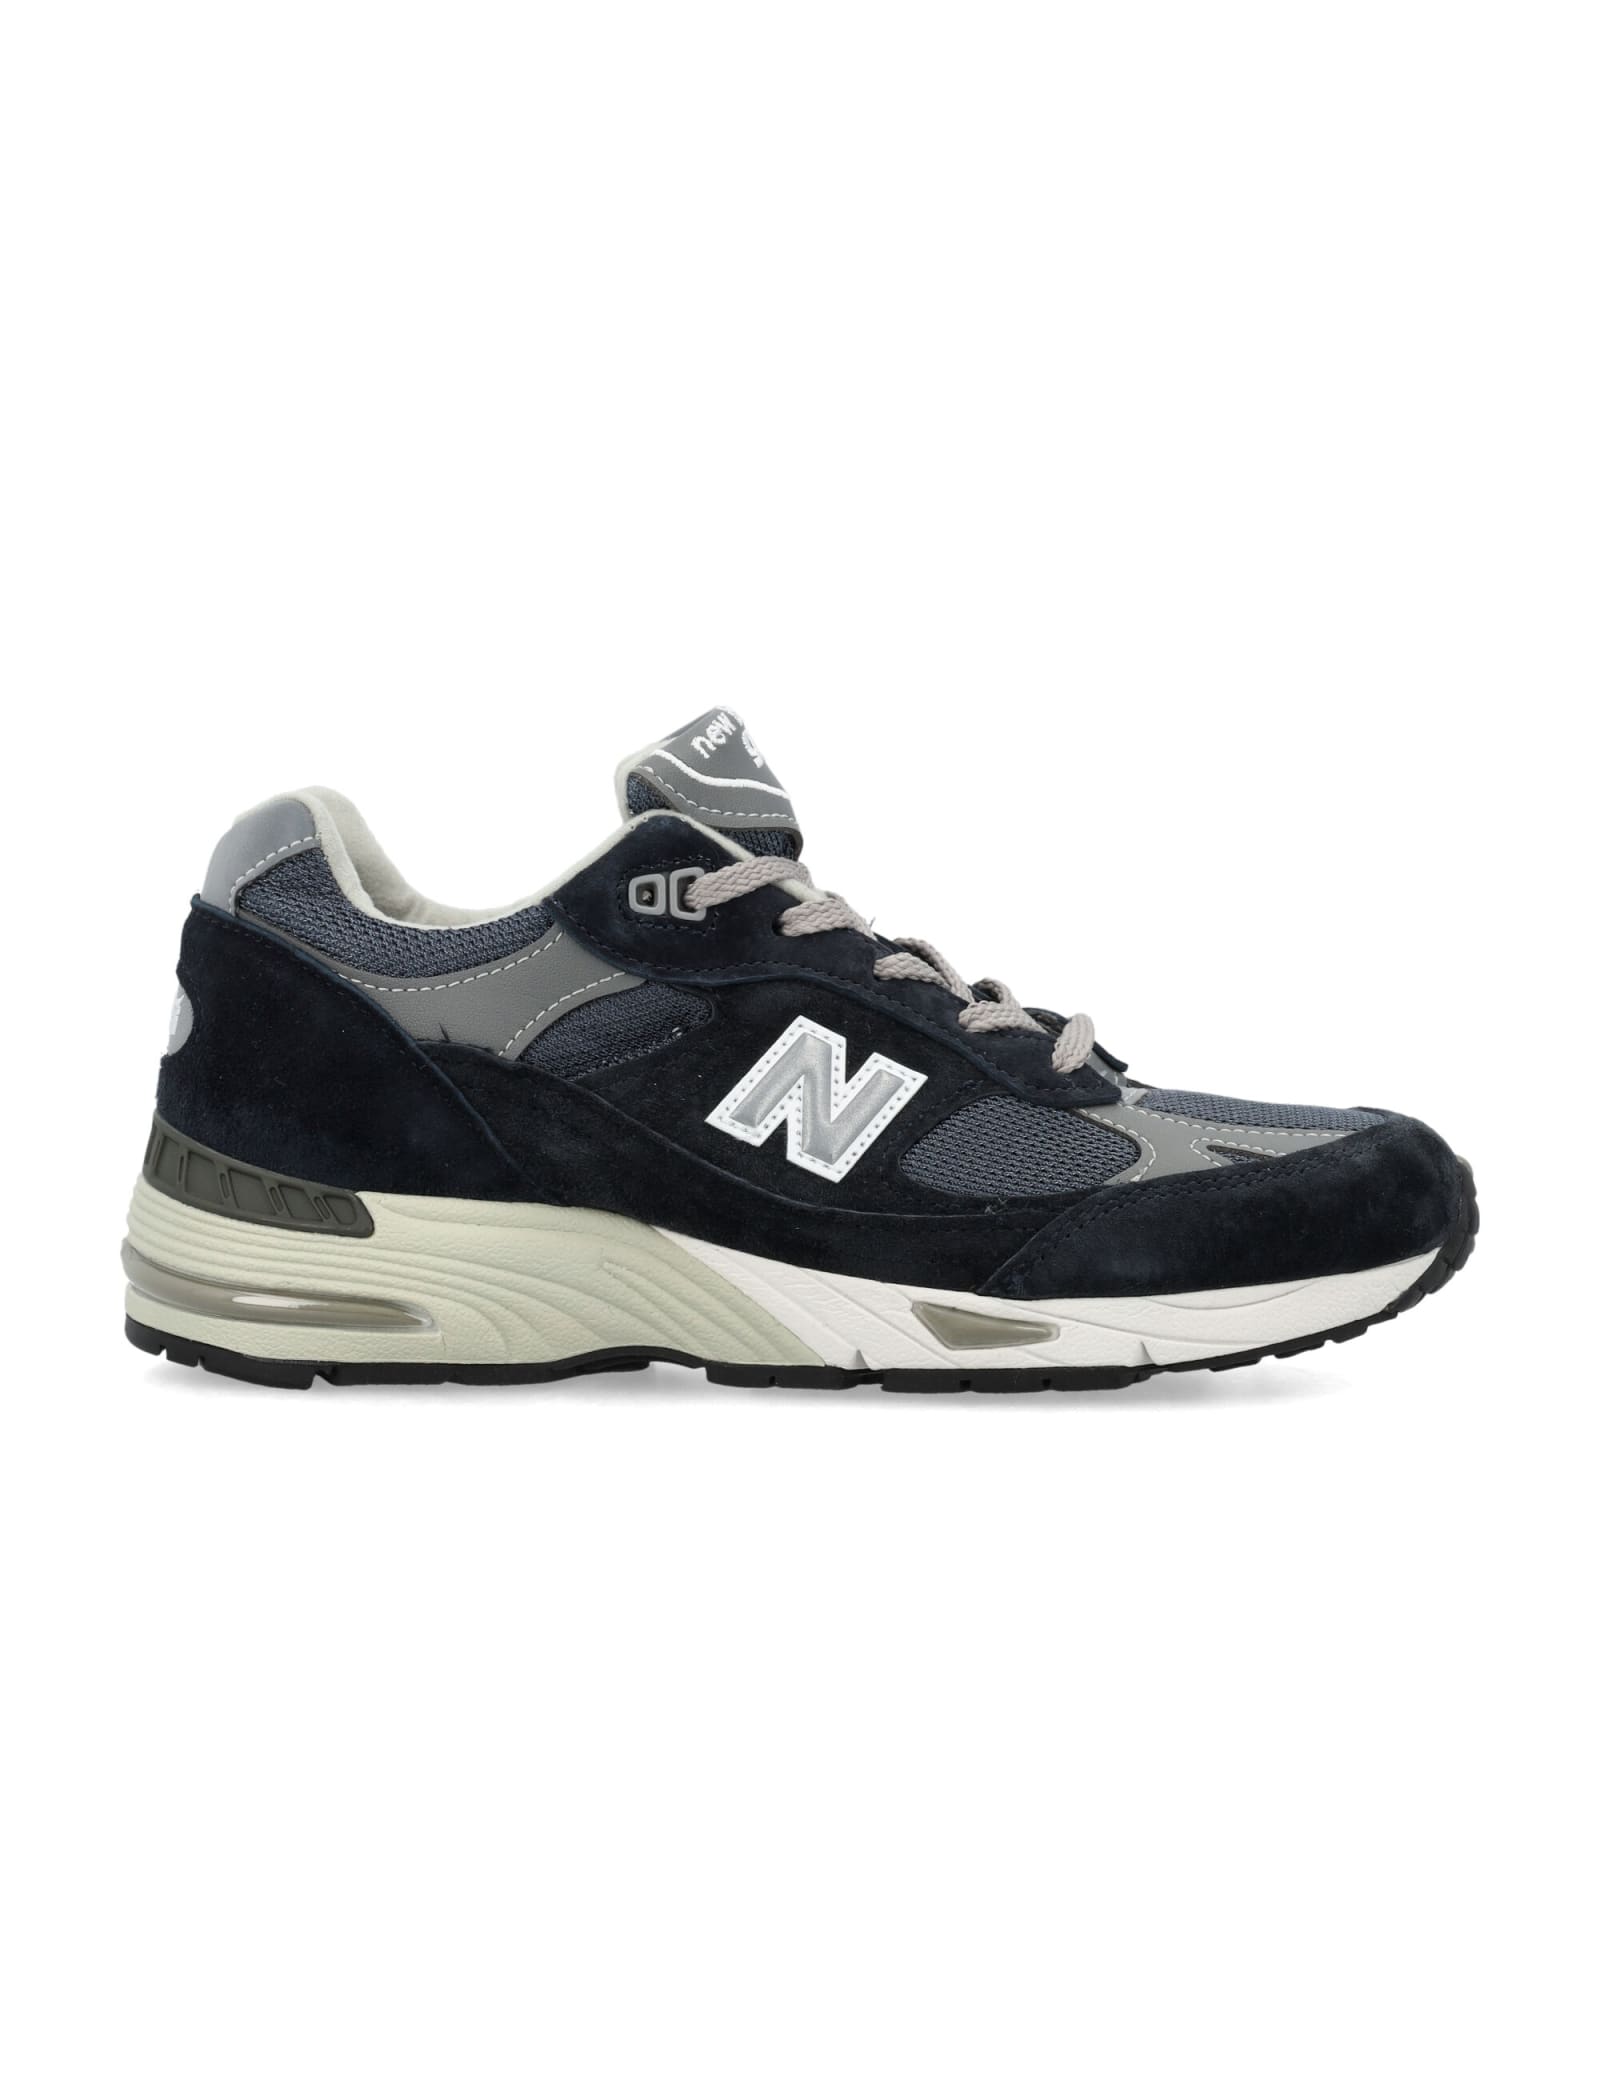 new balance made in uk 991v1 womans sneakers